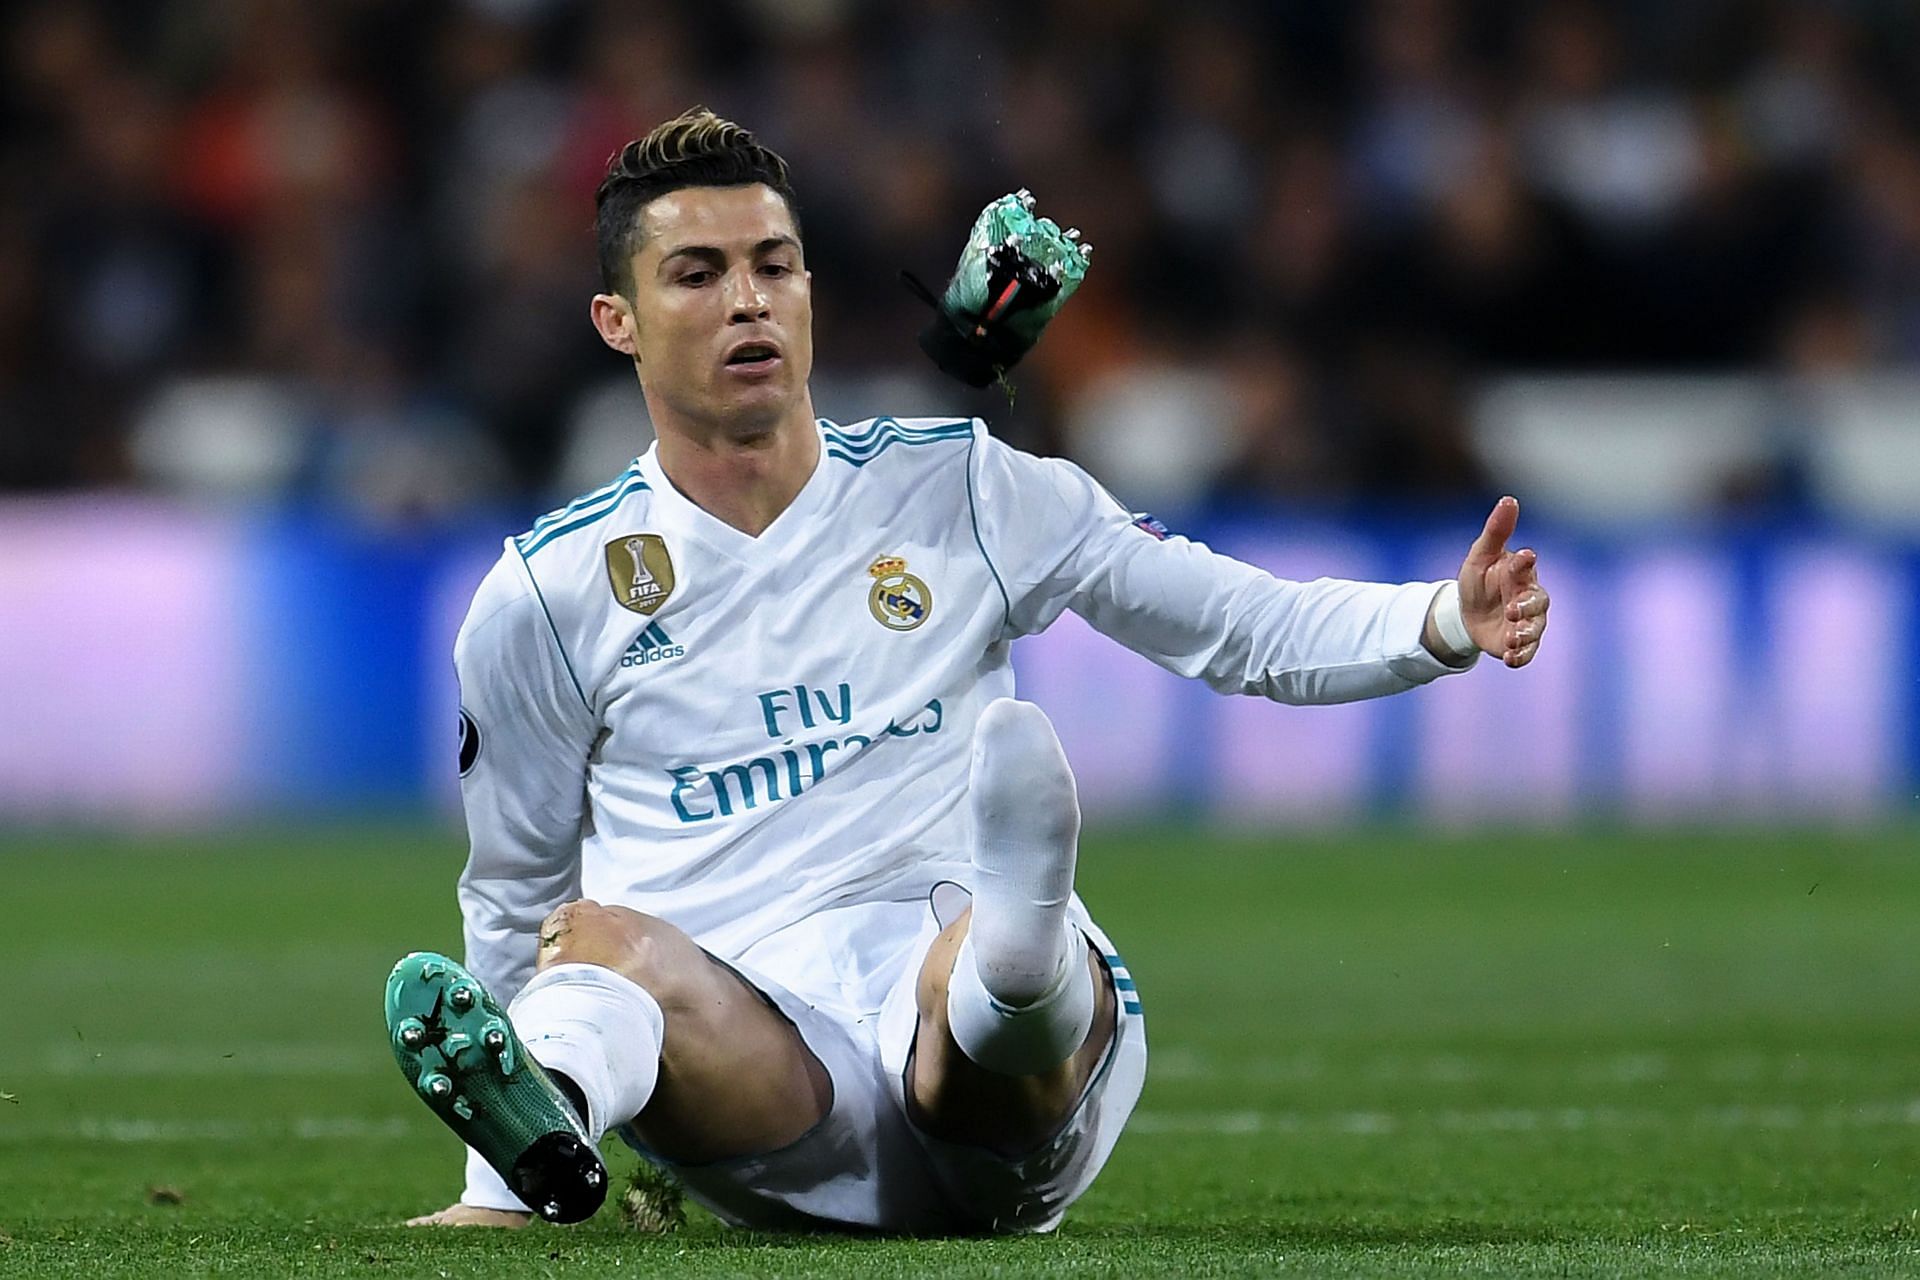 Cristiano Ronaldo was one of the many players booed by the Real Madrid faithful.